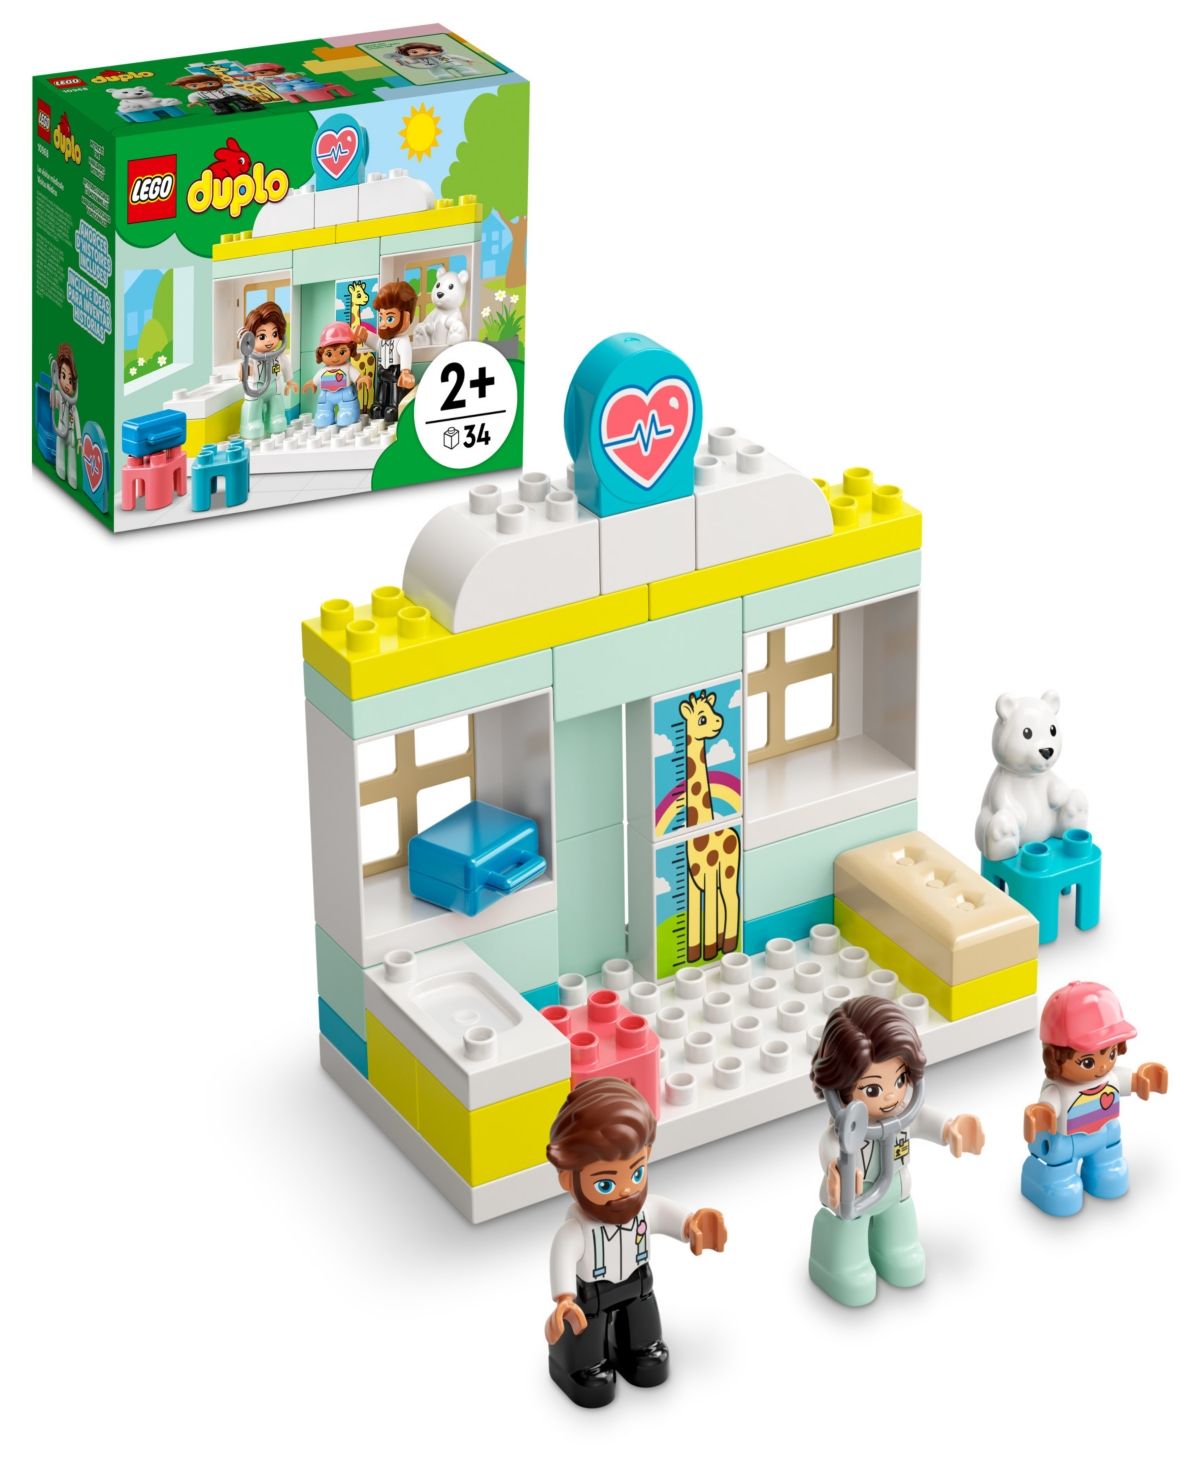 Lego Duplo Rescue Doctor Visit 10968 Educational Building Toy Playset | Macys (US)